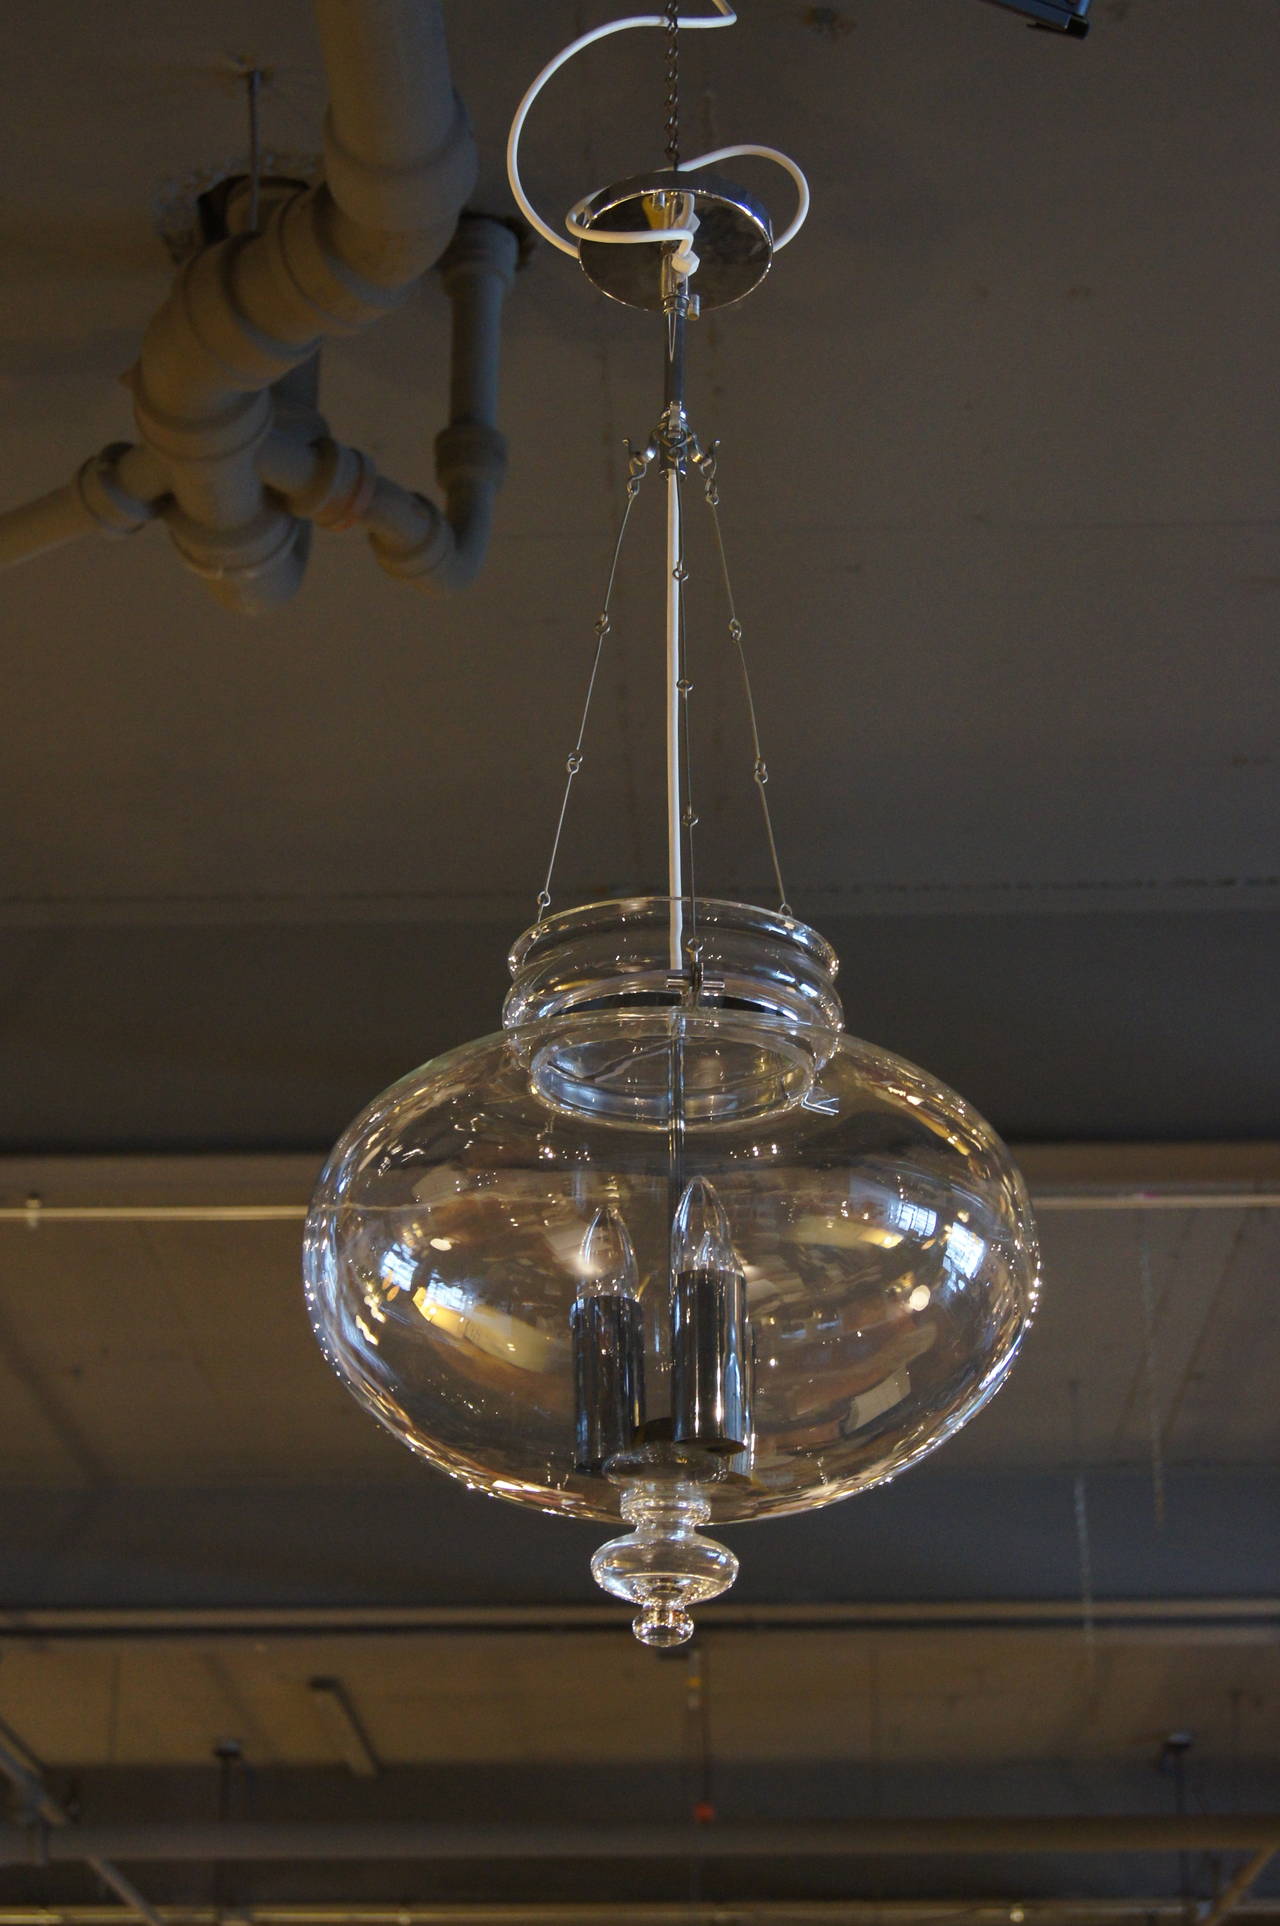 This hanging lamp was manufactured by Glashütte Limburg in Germany. It is composed of blown glass with three chrome light fixtures. Original tag is intact.